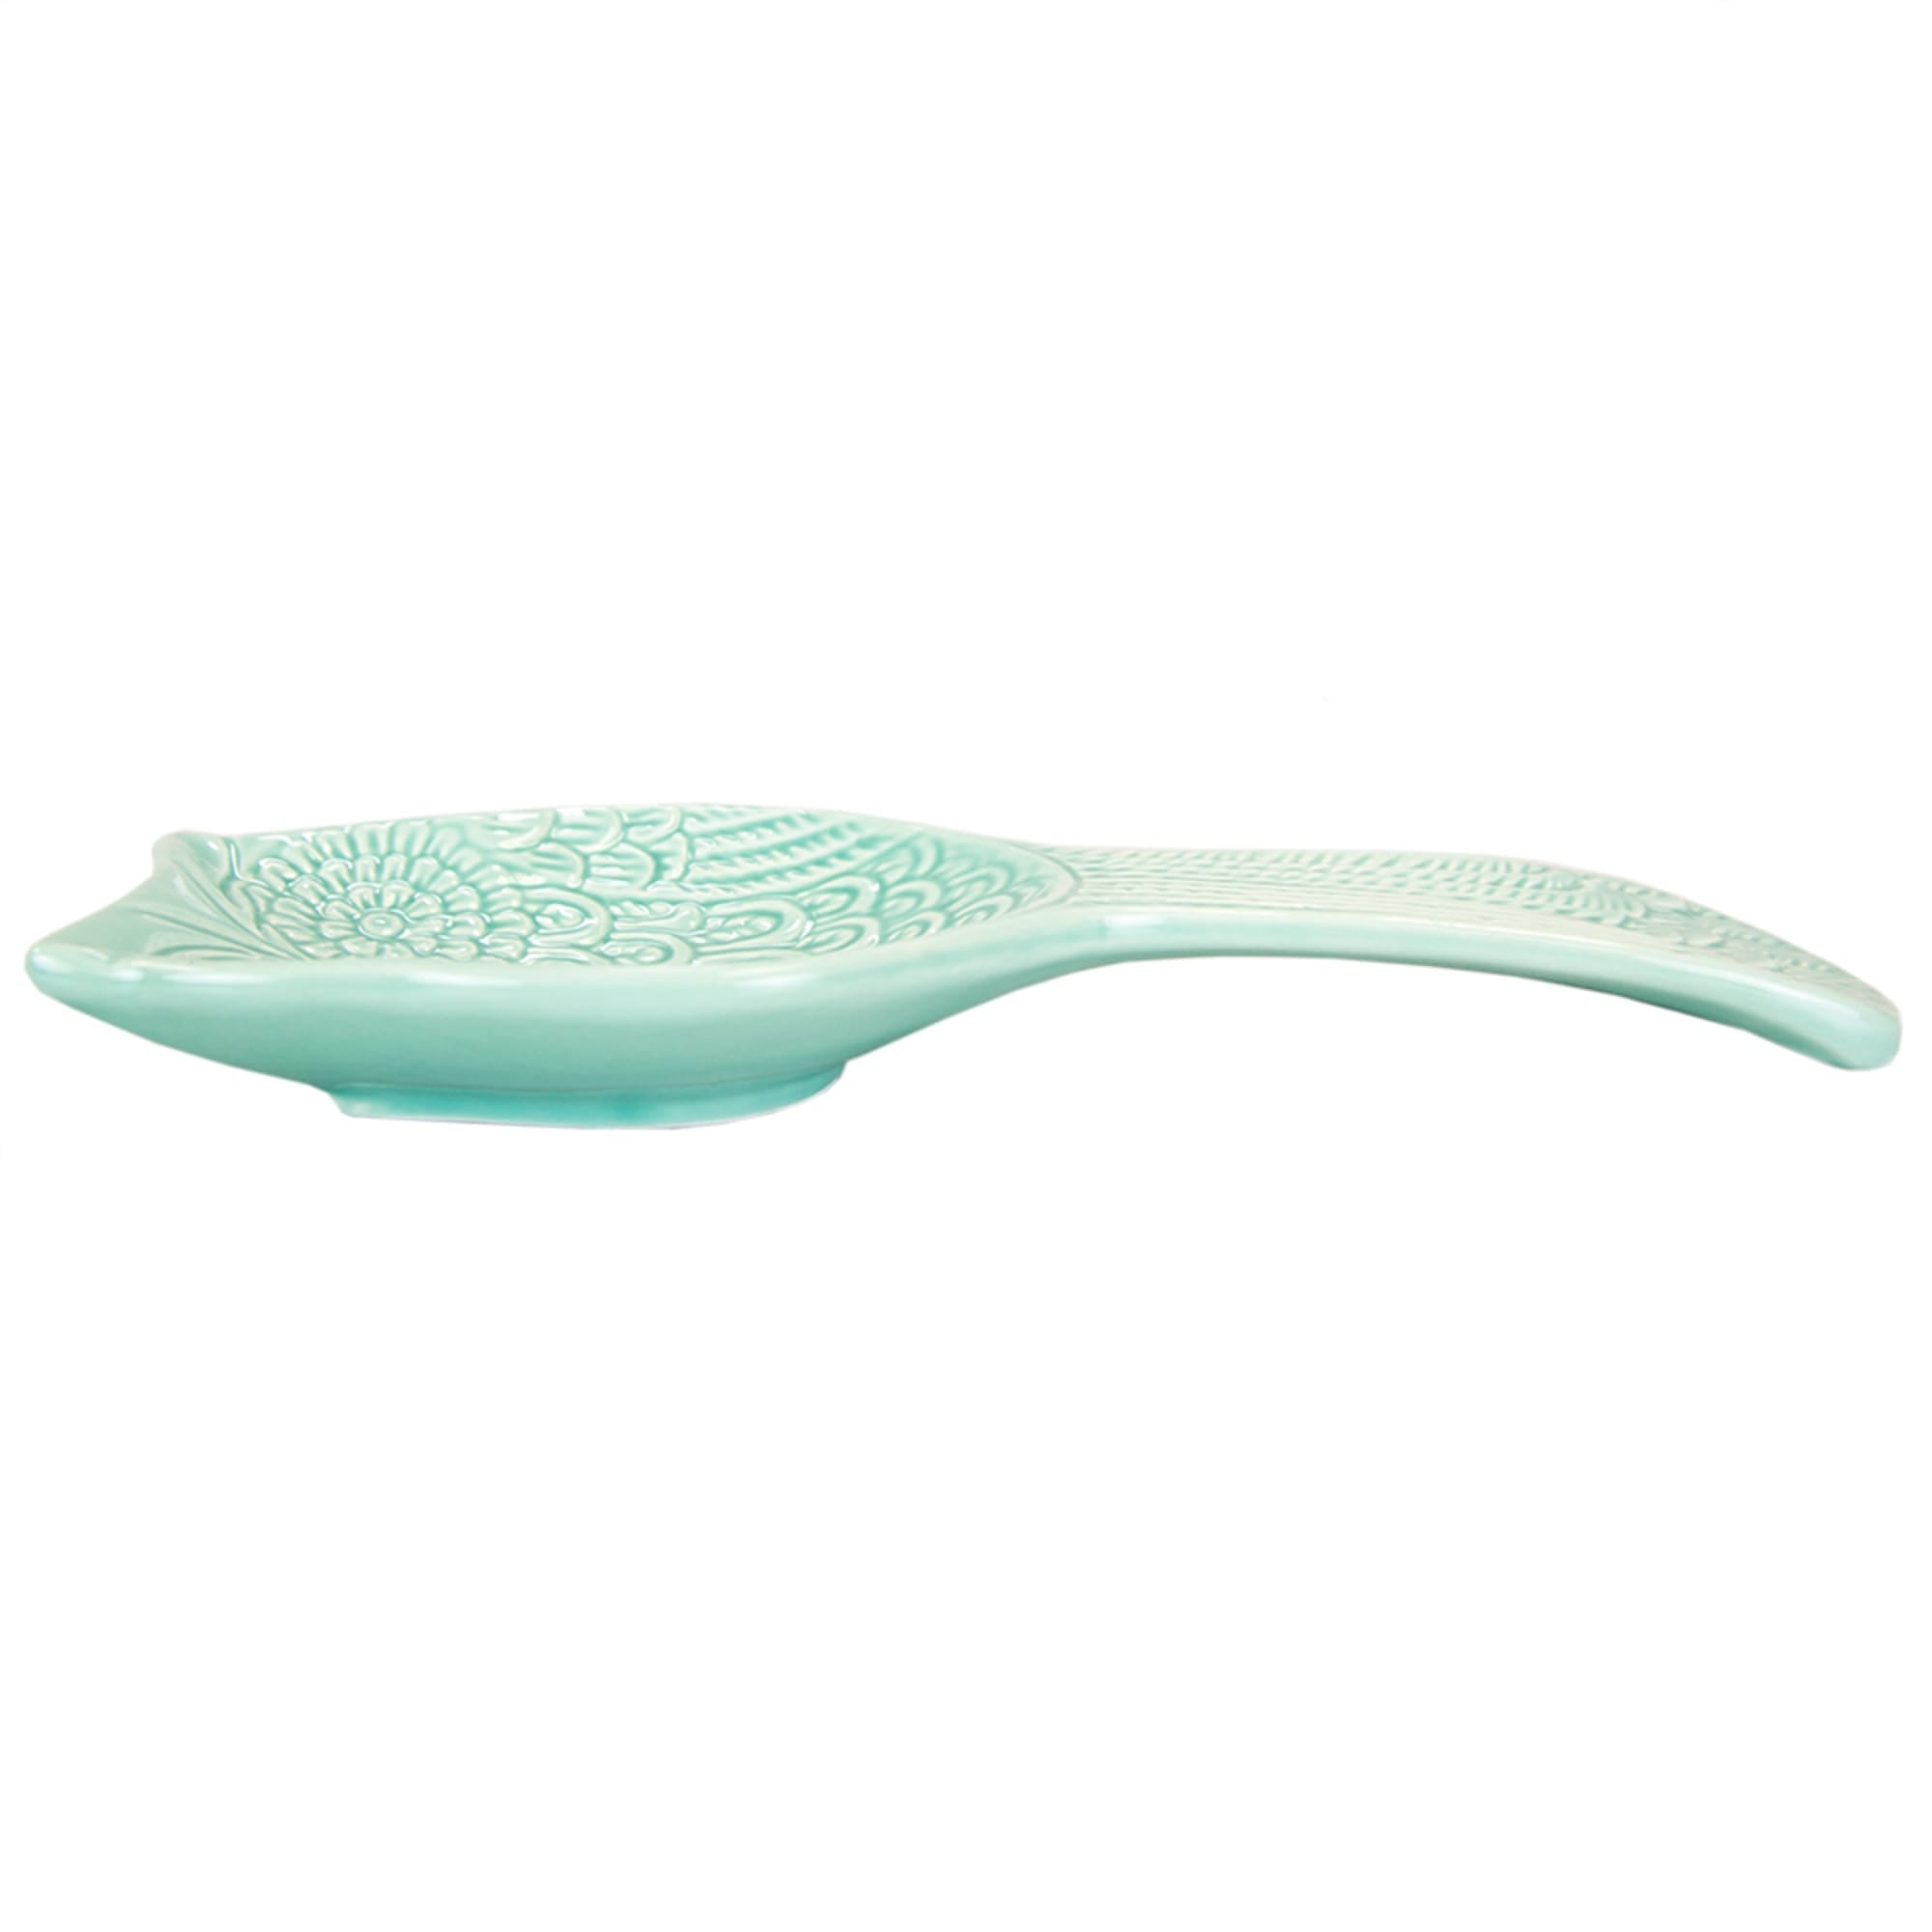 Home Basics Tropical Owl Ceramic Spoon Rest $4.00 EACH, CASE PACK OF 24